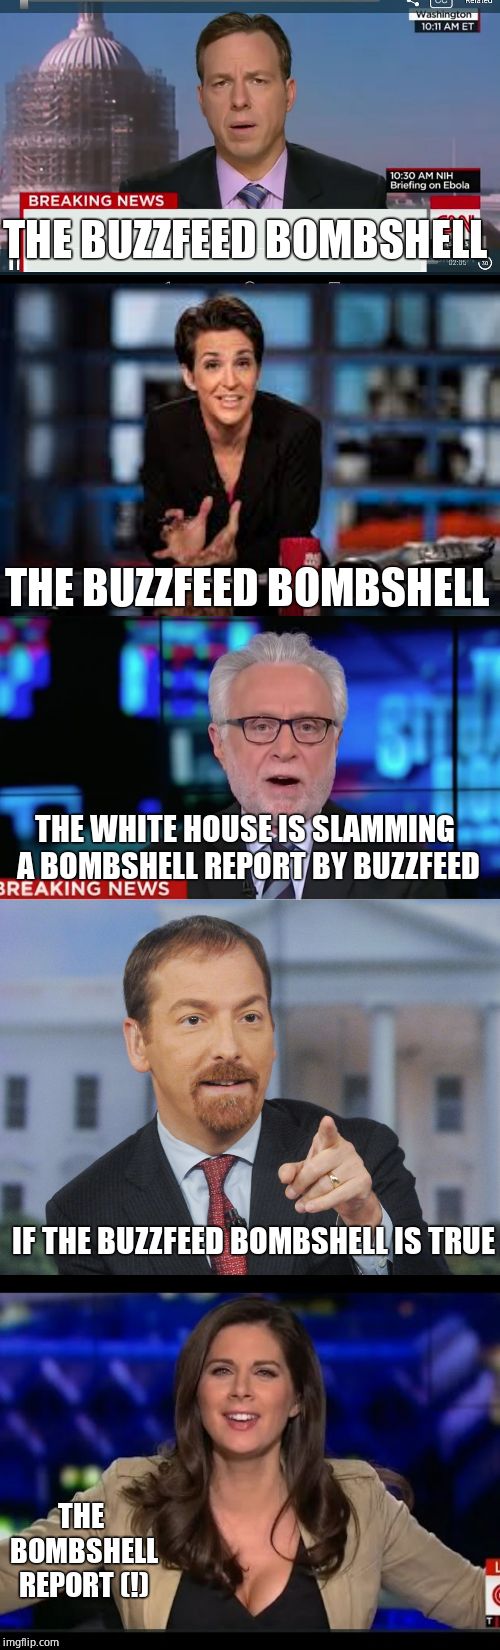 Lest we forget the leftist media swill eating smear mongers | THE BUZZFEED BOMBSHELL; THE BUZZFEED BOMBSHELL; THE WHITE HOUSE IS SLAMMING A BOMBSHELL REPORT BY BUZZFEED; IF THE BUZZFEED BOMBSHELL IS TRUE; THE BOMBSHELL REPORT (!) | image tagged in wolf blitzer,rachel maddow,cnn breaking news template,buzzfeed,fake news | made w/ Imgflip meme maker